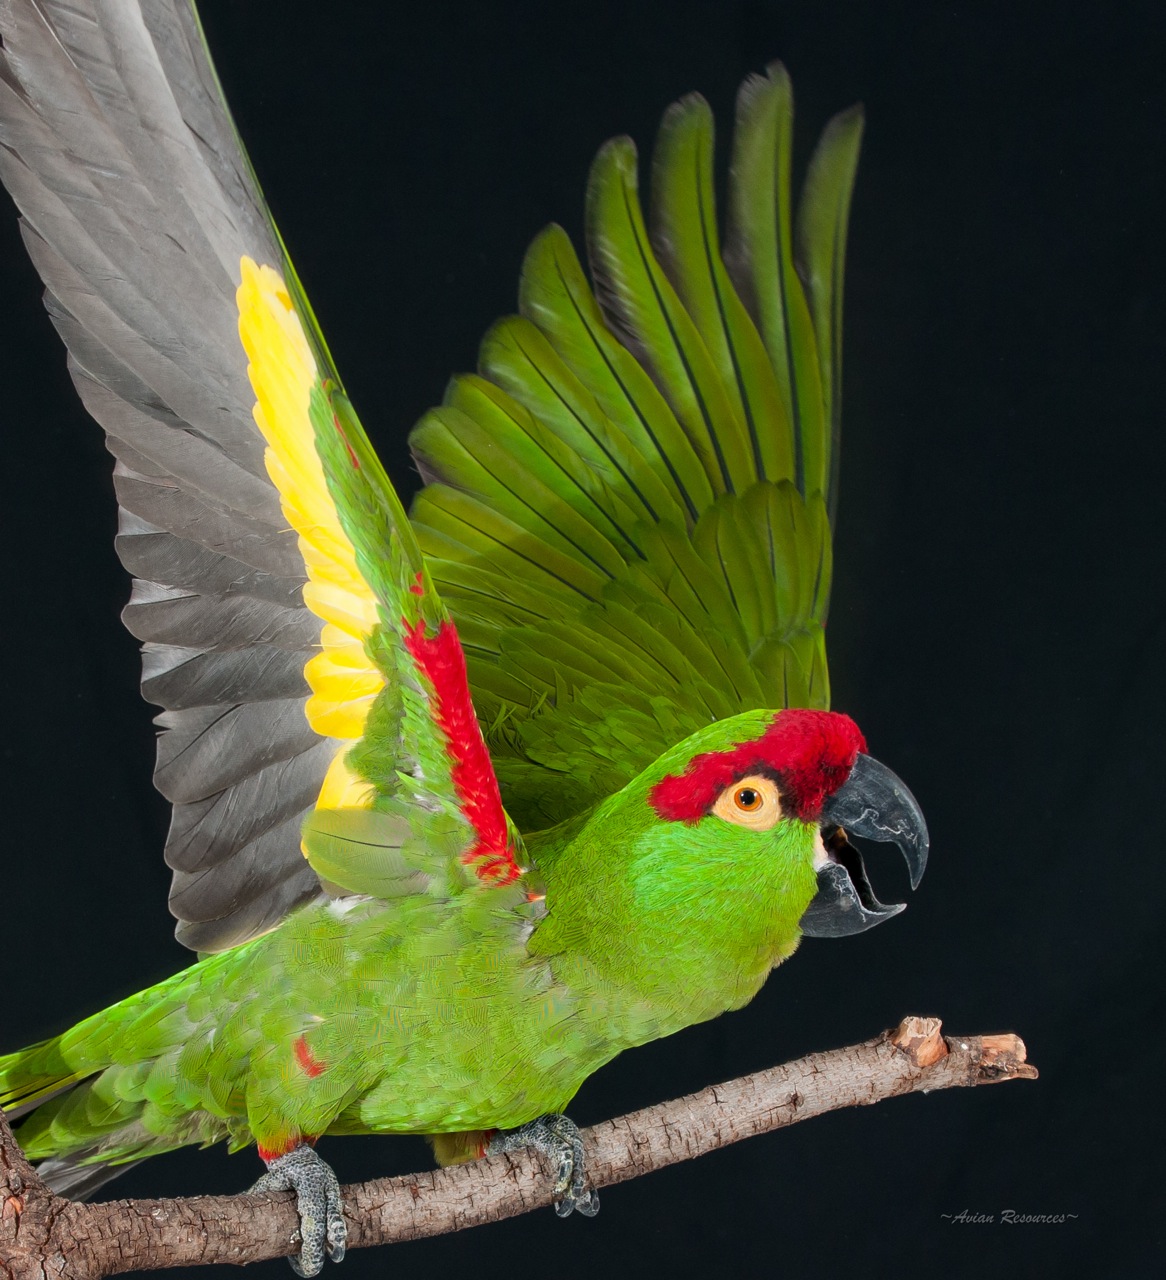 BRI based article about Thick-billed Parrot history in US